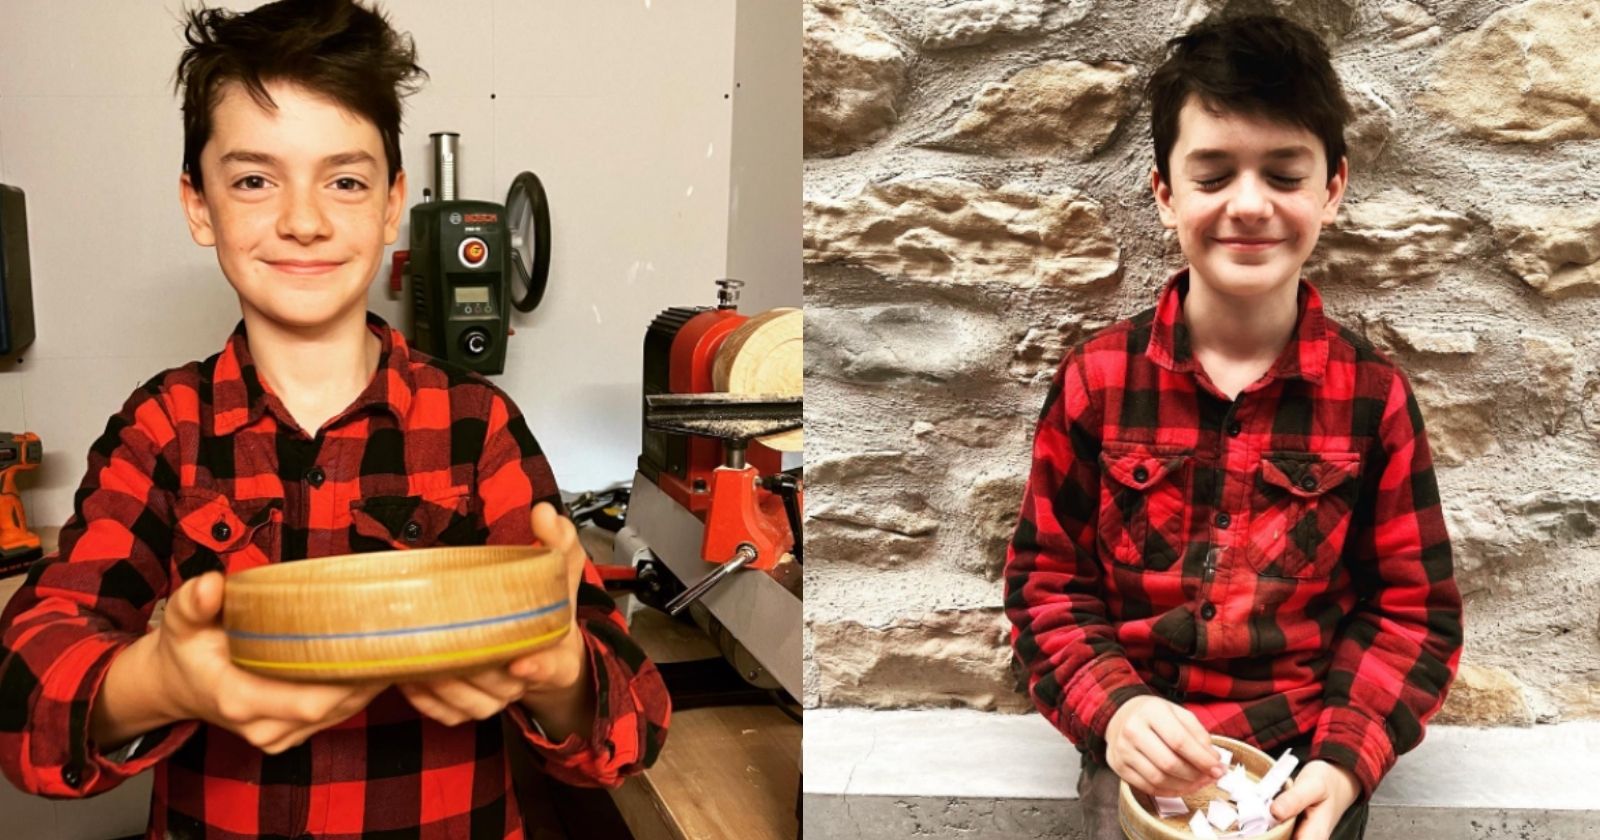 Humiliated for his love of wood, this young boy becomes a star after a solidarity tweet